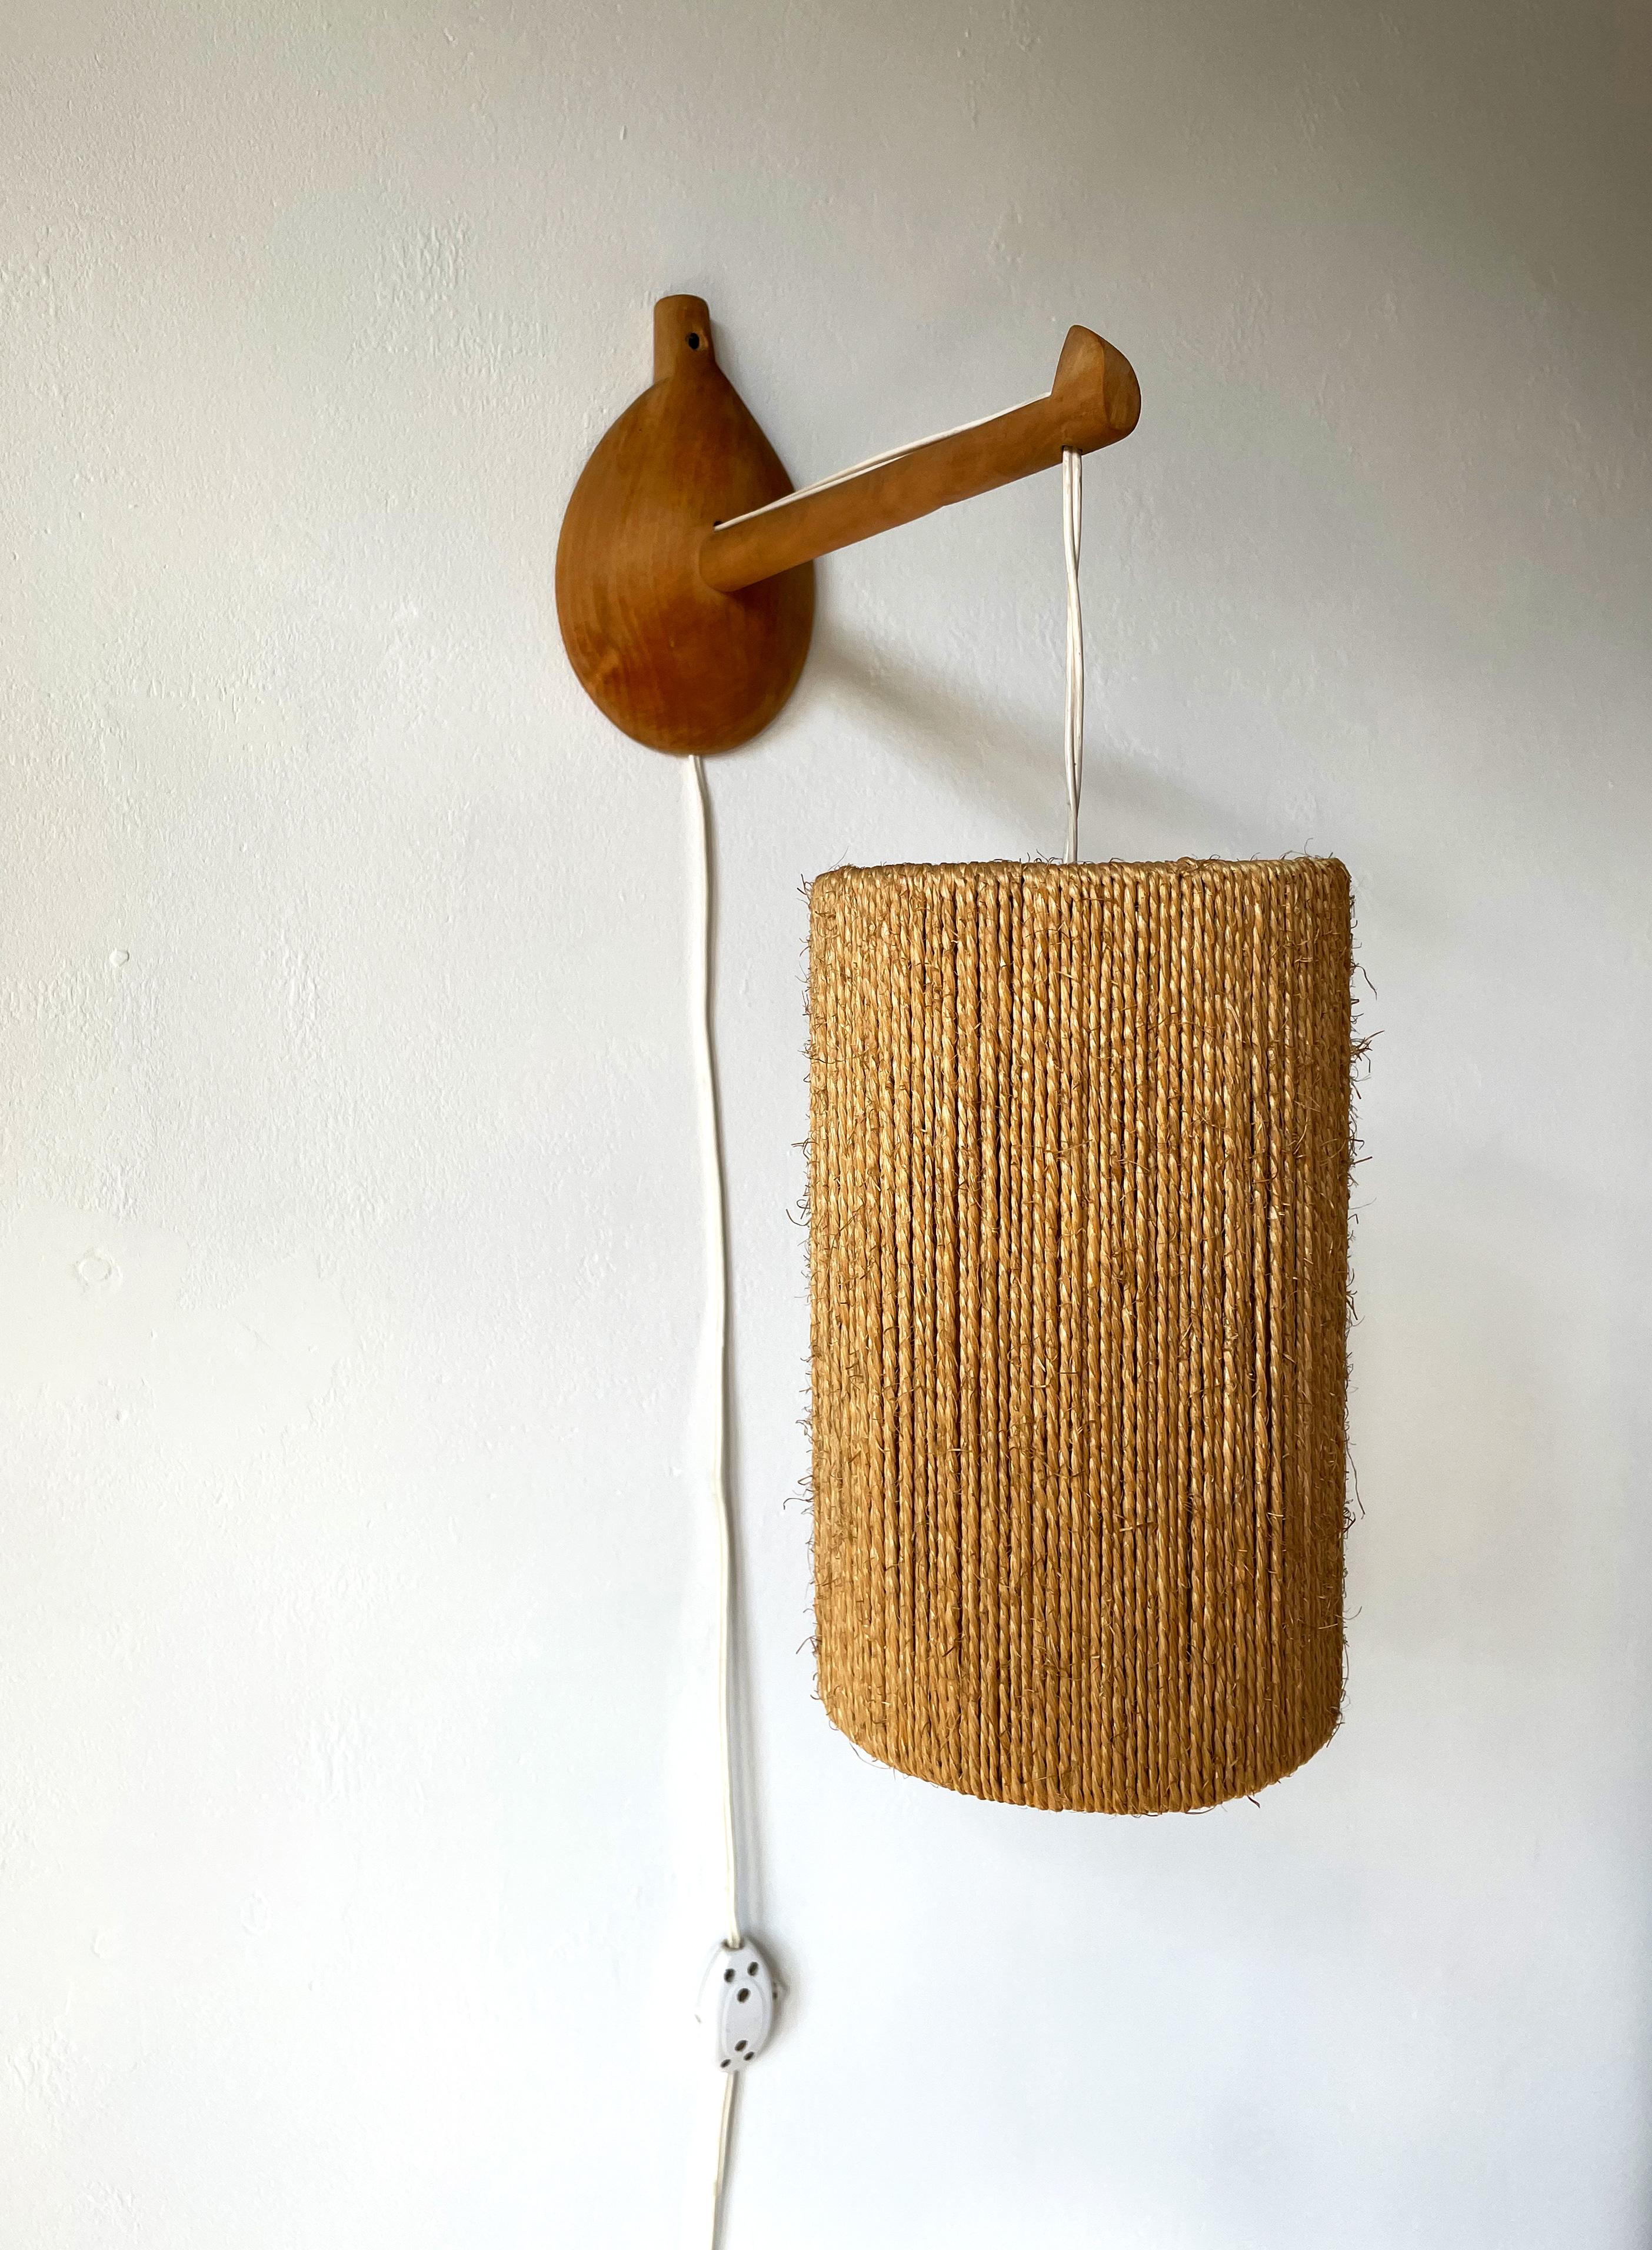 Classic 1950s Scandinavian midcentury modern wall lamp. Attributed to/in the style of Ib Fabiansen for Fog & Mørup. Papercord braided cylinder lamp shade on wooden mount and stem. E27 bulb. Switch on cord. Beautiful vintage condition.
Denmark,